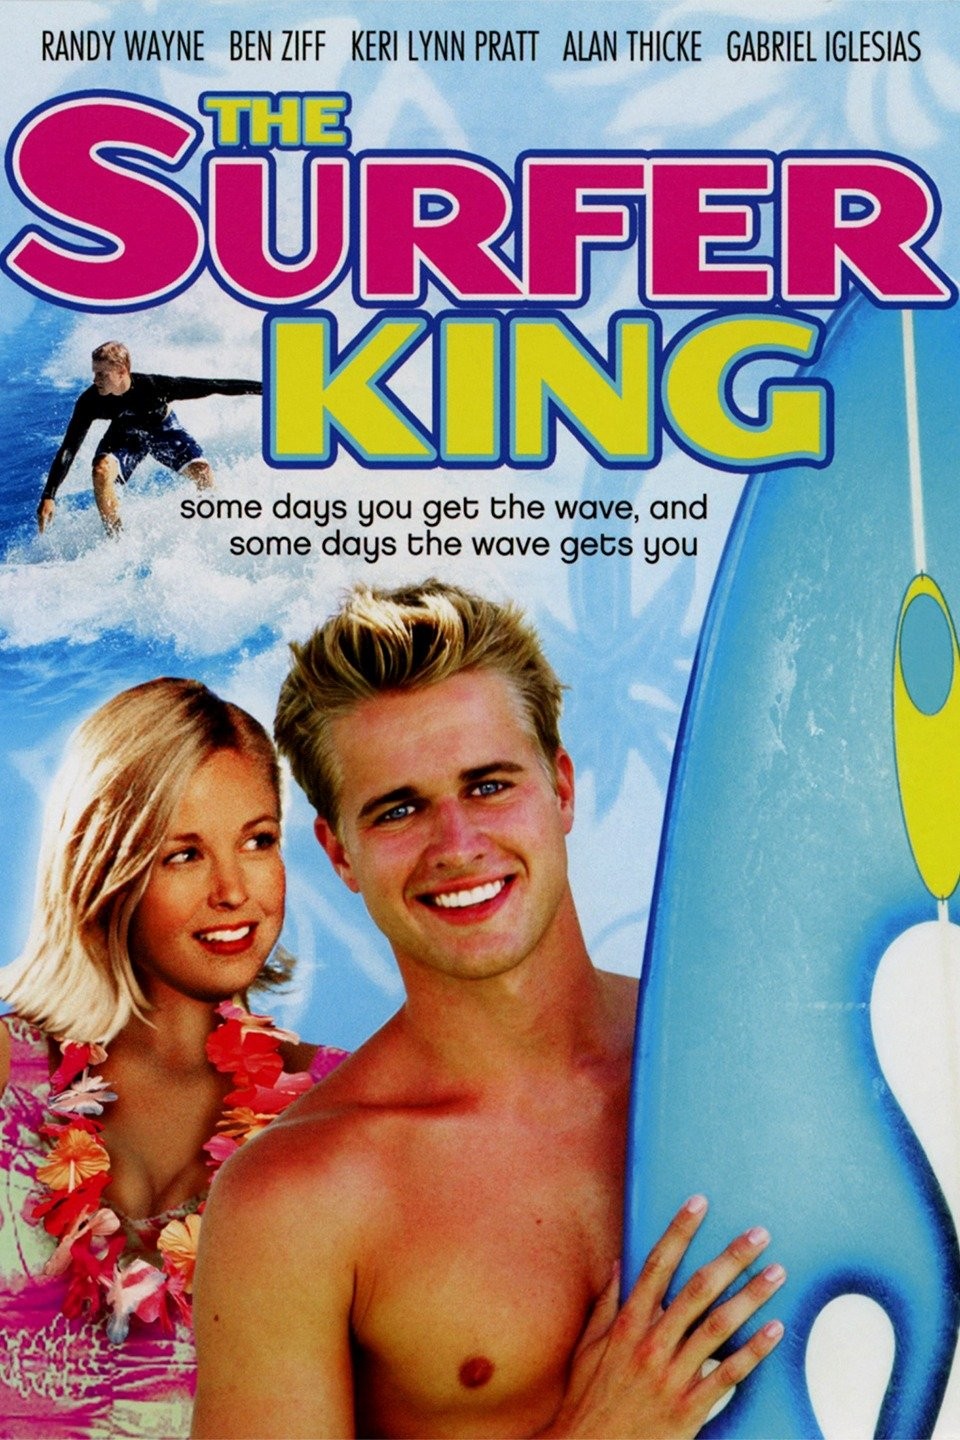 The surfer king movie